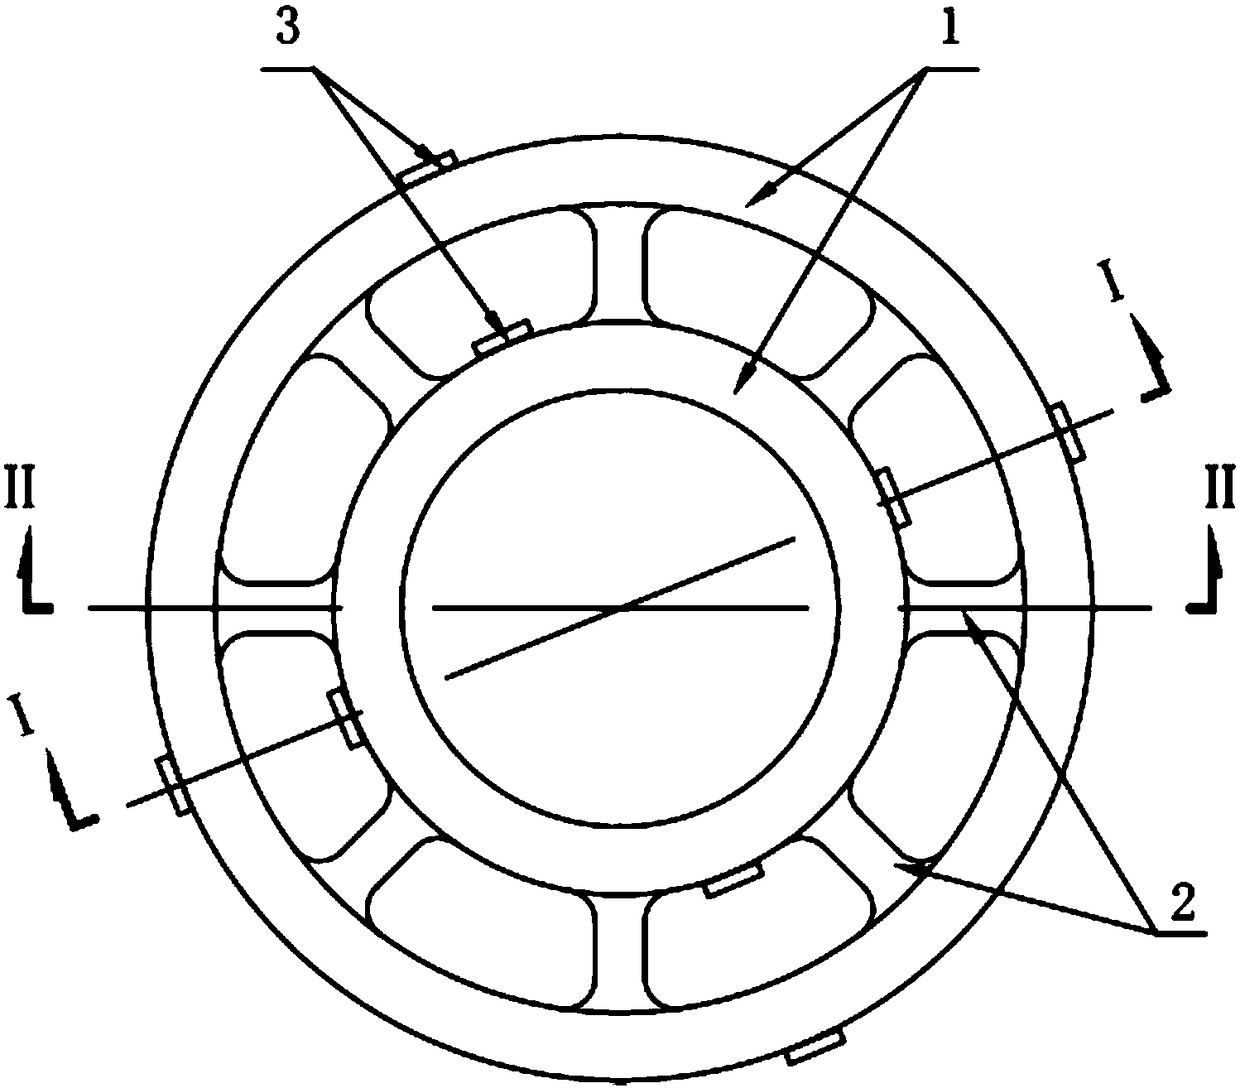 Load sensor of multi-ring structure